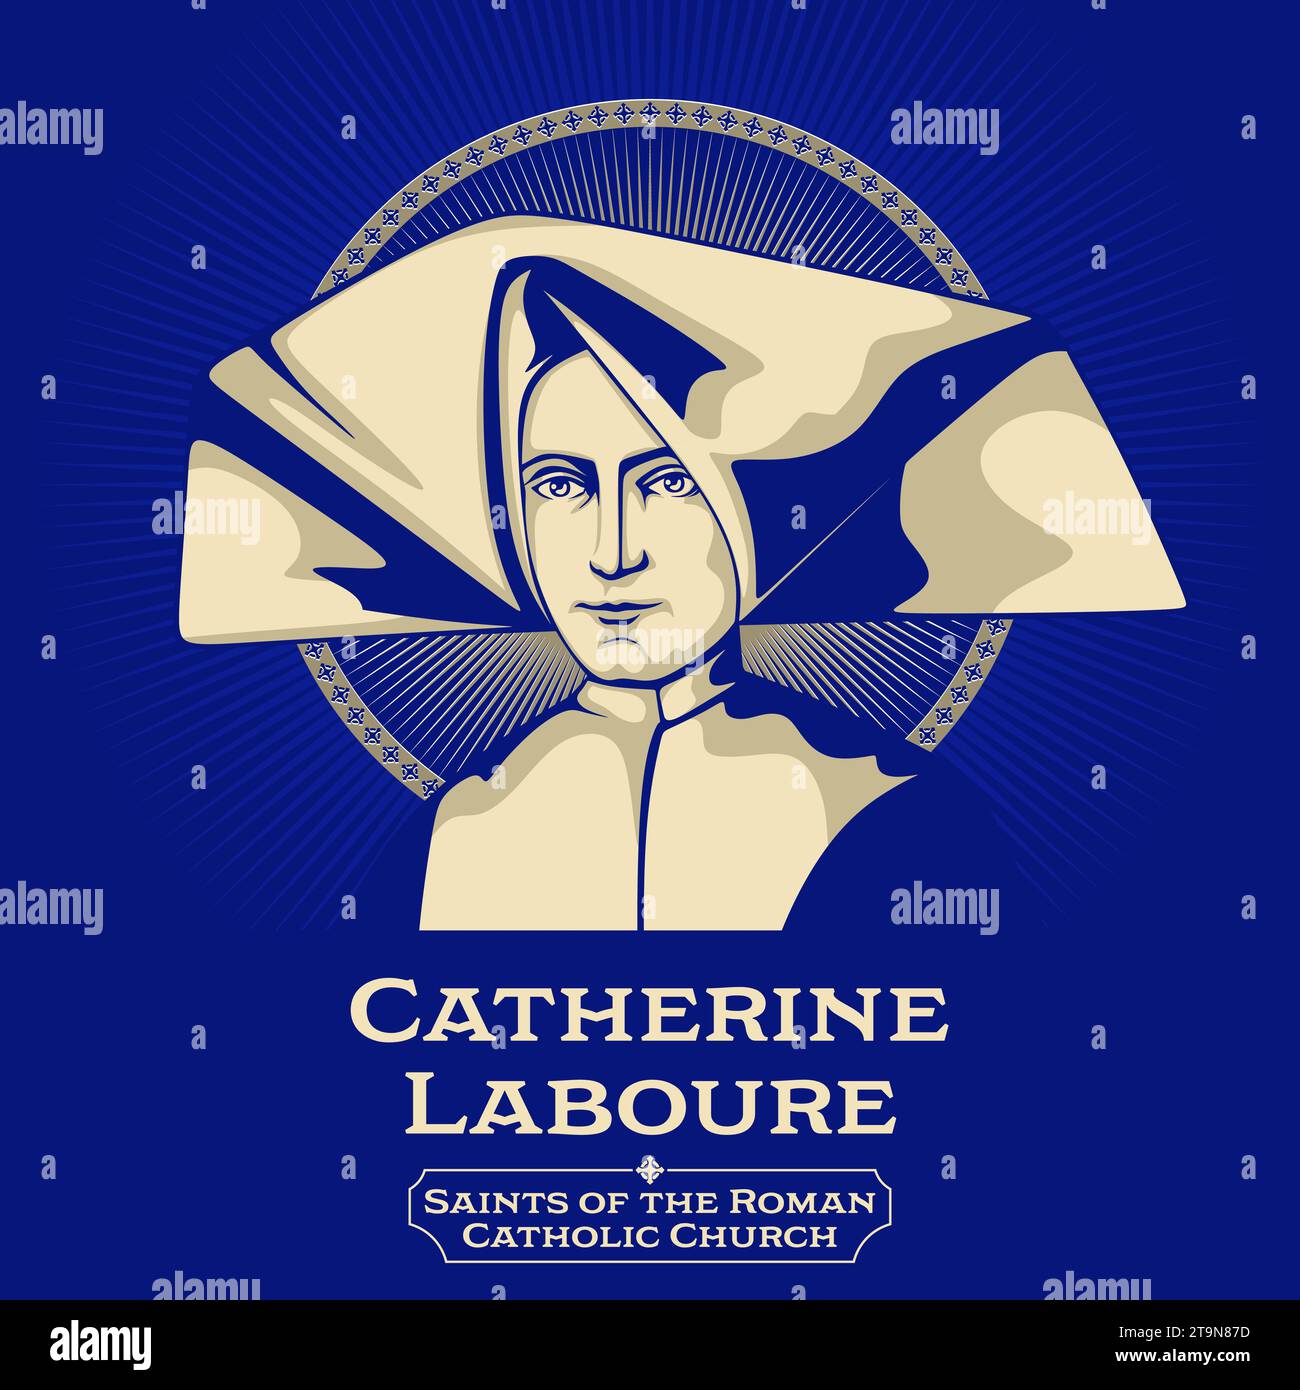 Catholic Saints. Catherine Laboure (1806-1876) was a French member of the Daughters of Charity of Saint Vincent de Paul and a Marian visionary. Stock Vector